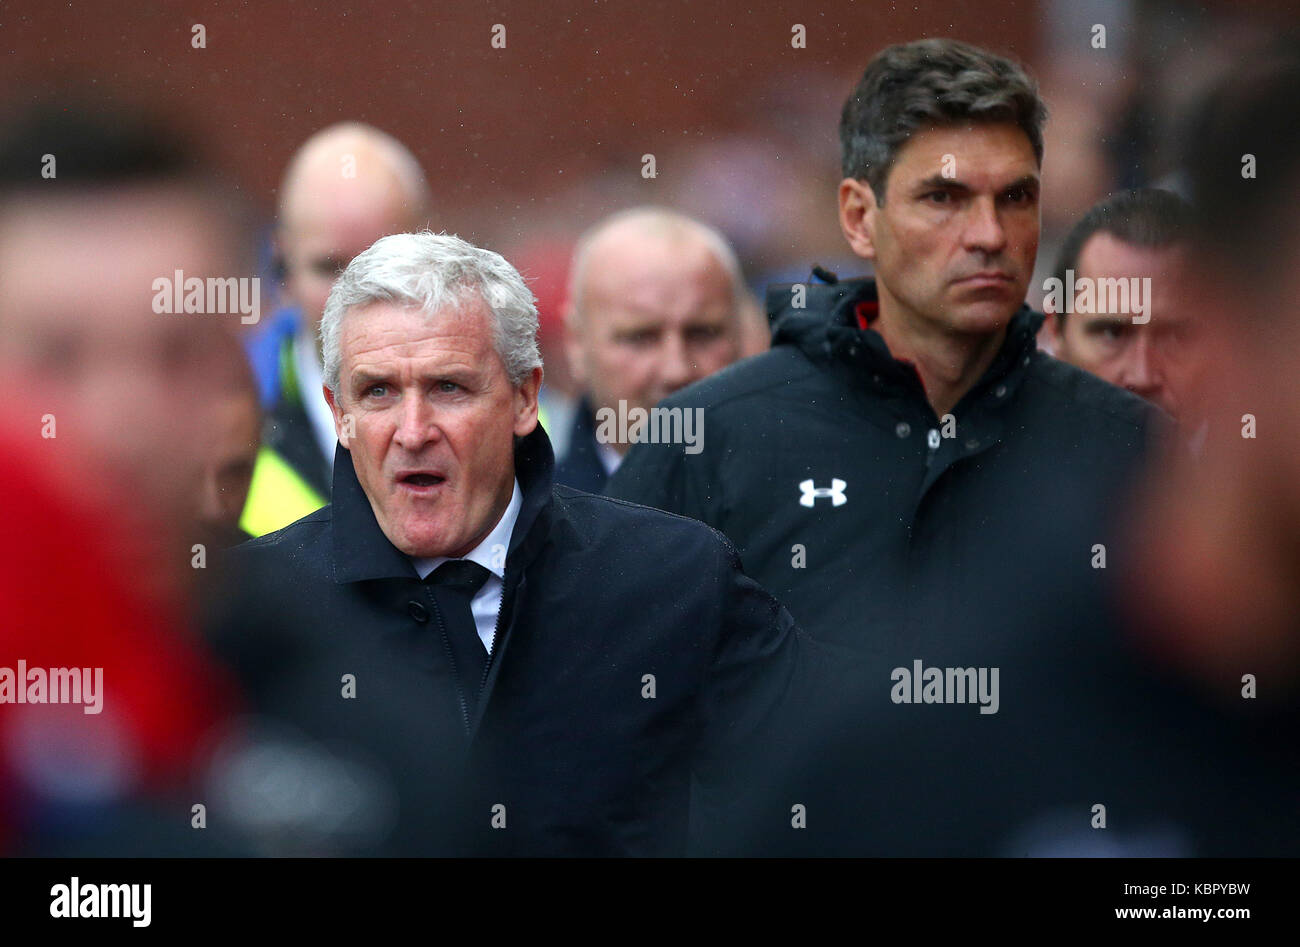 Stoke City manager Mark Hughes (left) and Southampton manager Mauricio Pellegrino before the Premier League match at the bet365 Stadium, Stoke. Stock Photo